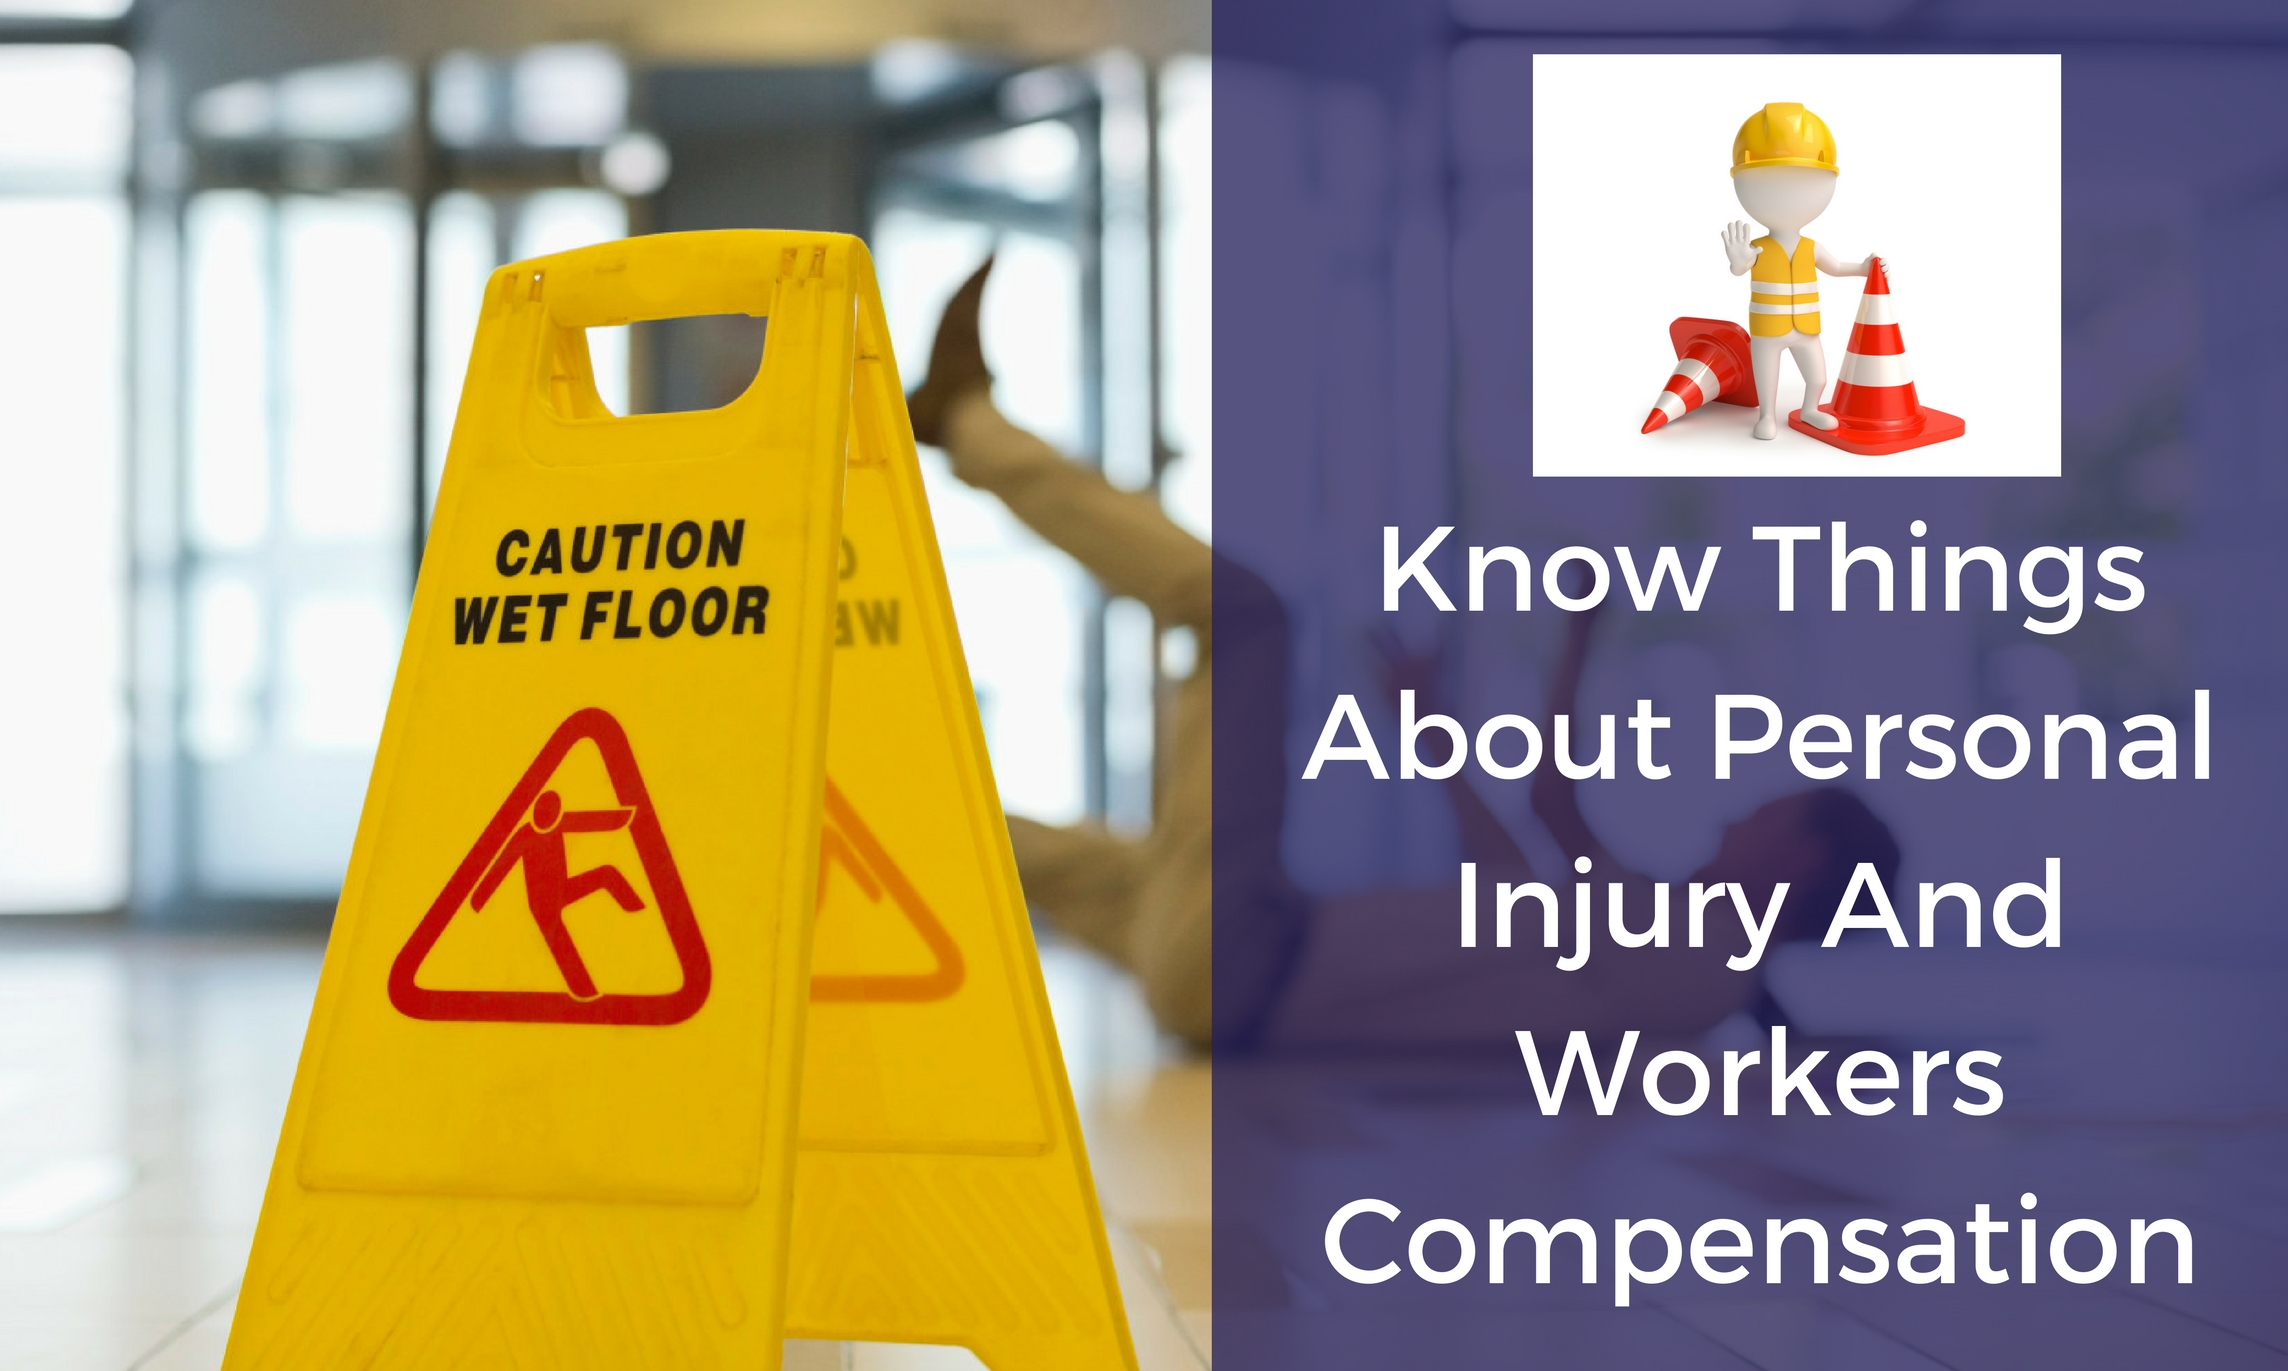 Know Things About Personal Injury And Workers Compensation